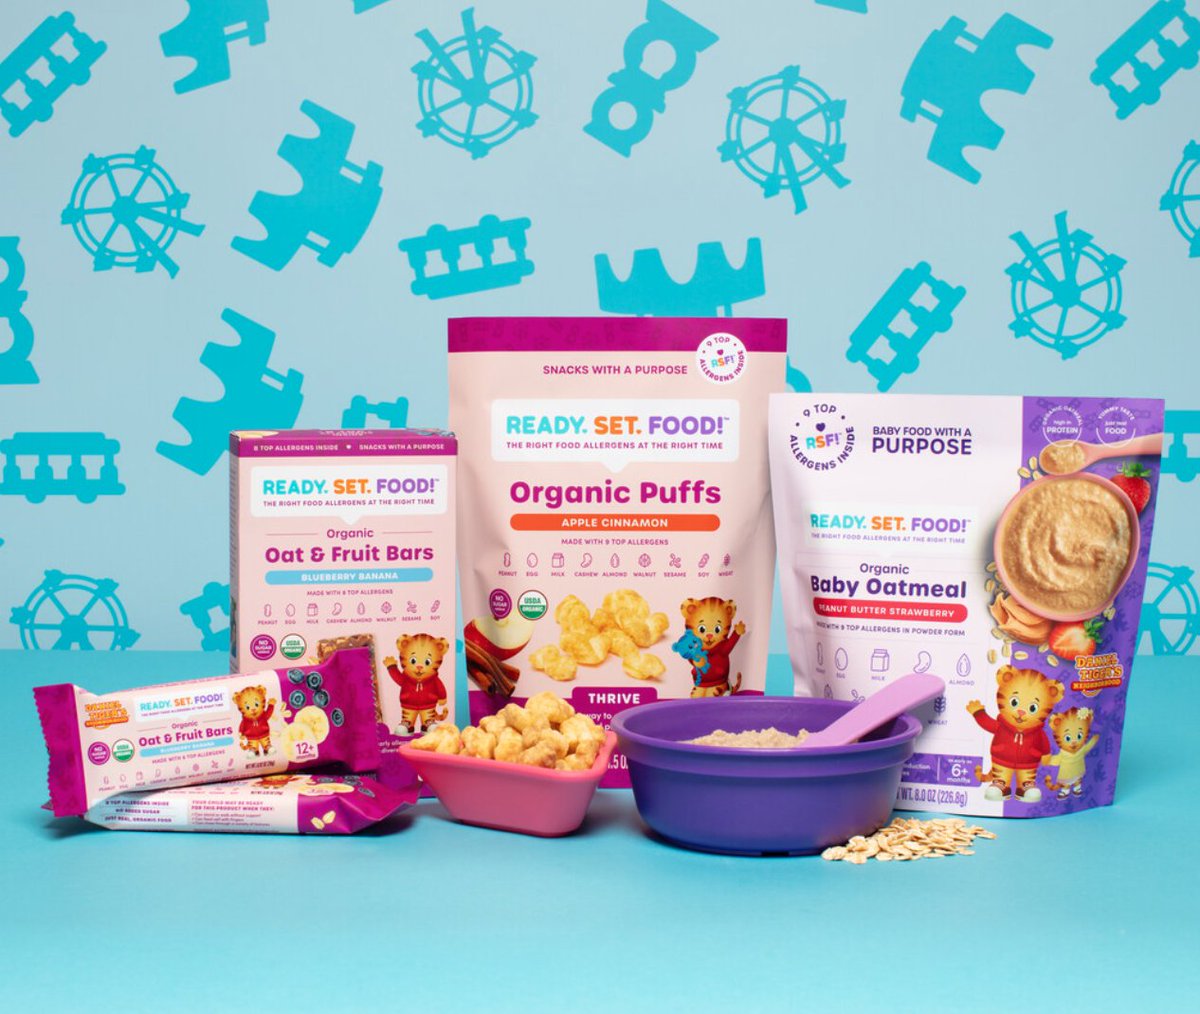 The @_ReadySetFood x Daniel Tiger collection has a variety of products to help you start early allergen introduction with your little tigers. You can find out more and check out their newest offerings at their website!